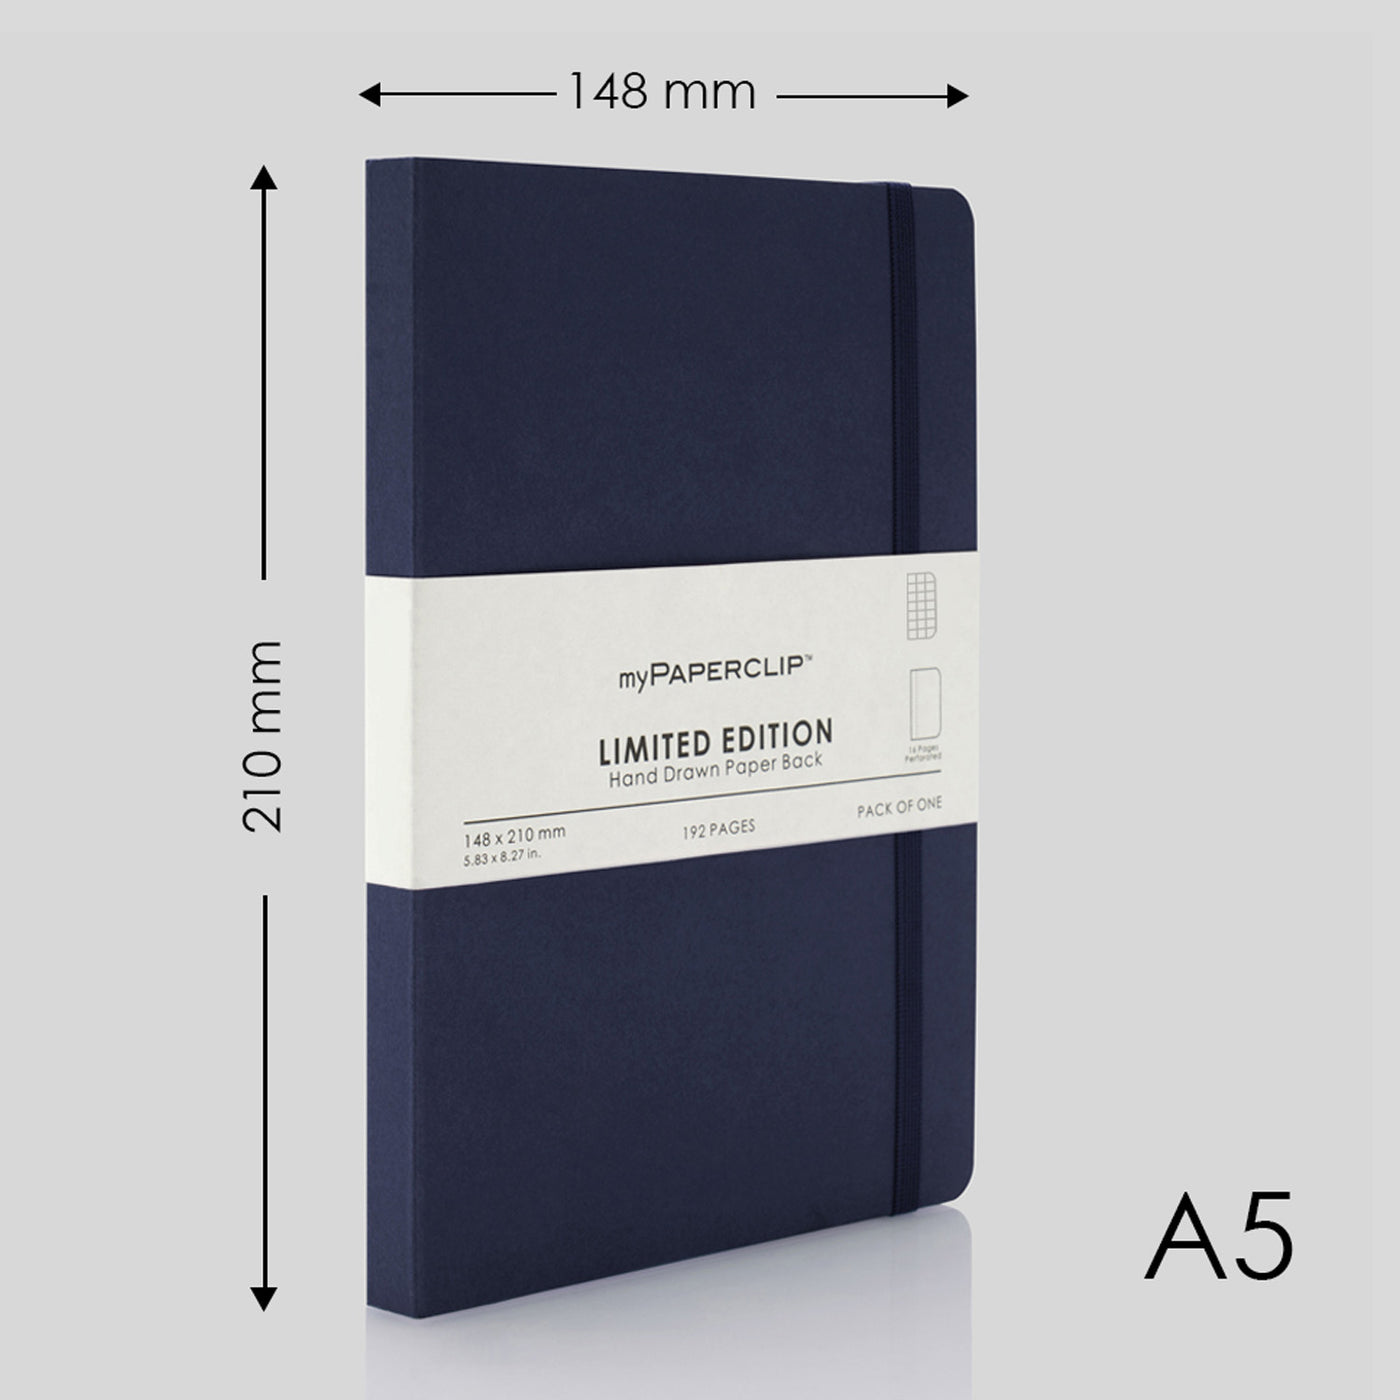 myPAPERCLIP Limited Edition Soft Cover Notebook - Imperial - A5 - Squared 2